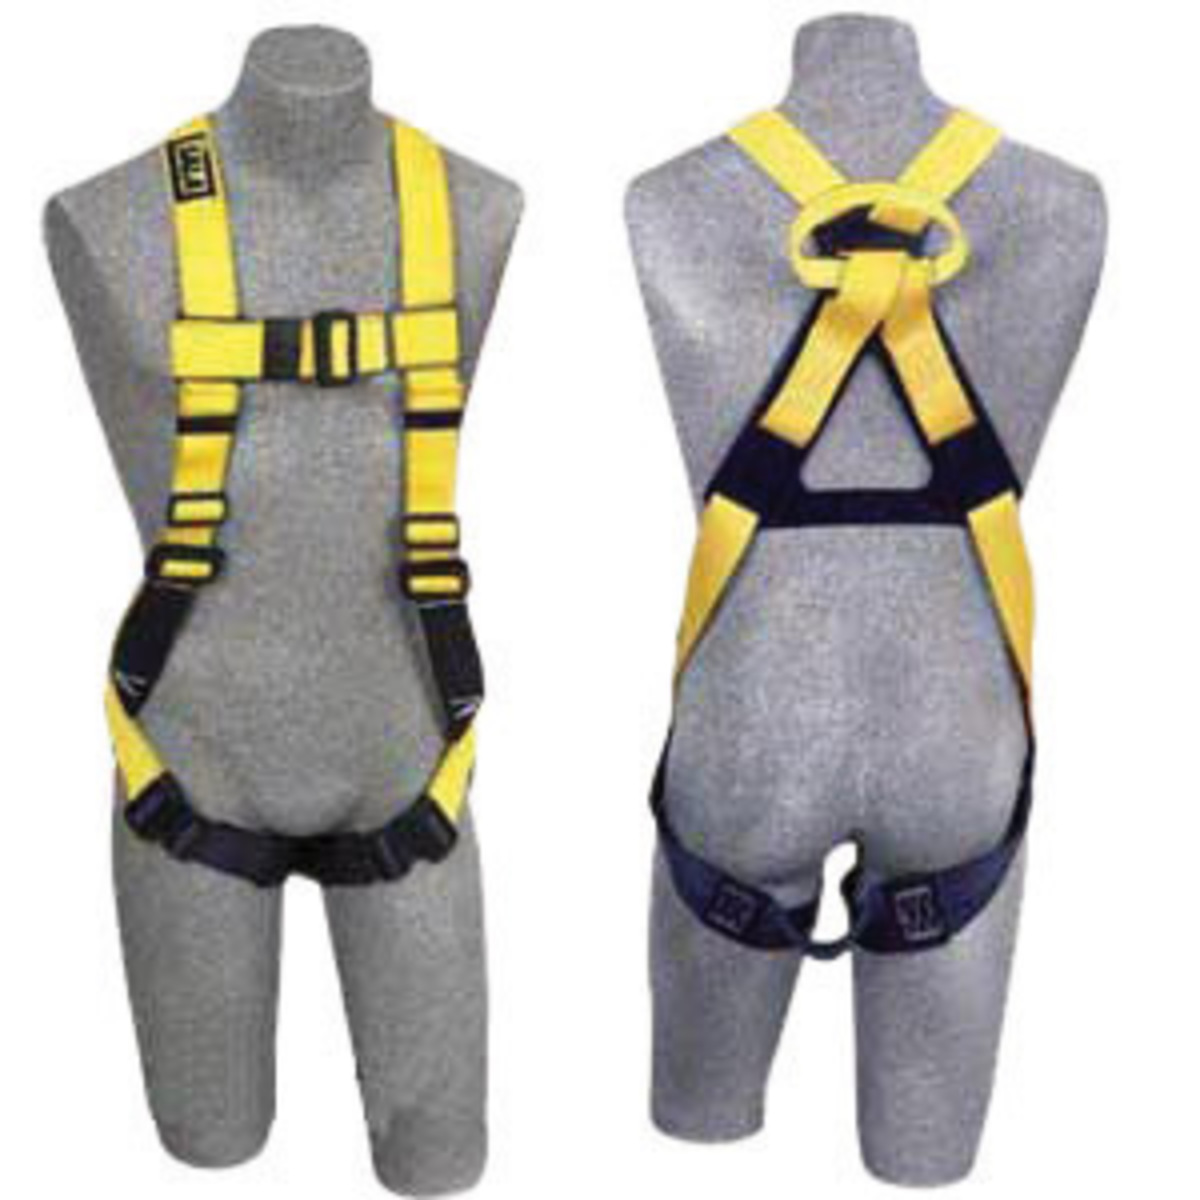 3M™ DBI-SALA® Small Delta™ II No-Tangle™ Full Body/Vest Style Harness With Back Web Loop, Pass-Thru Leg Strap Buckle And Non-Con